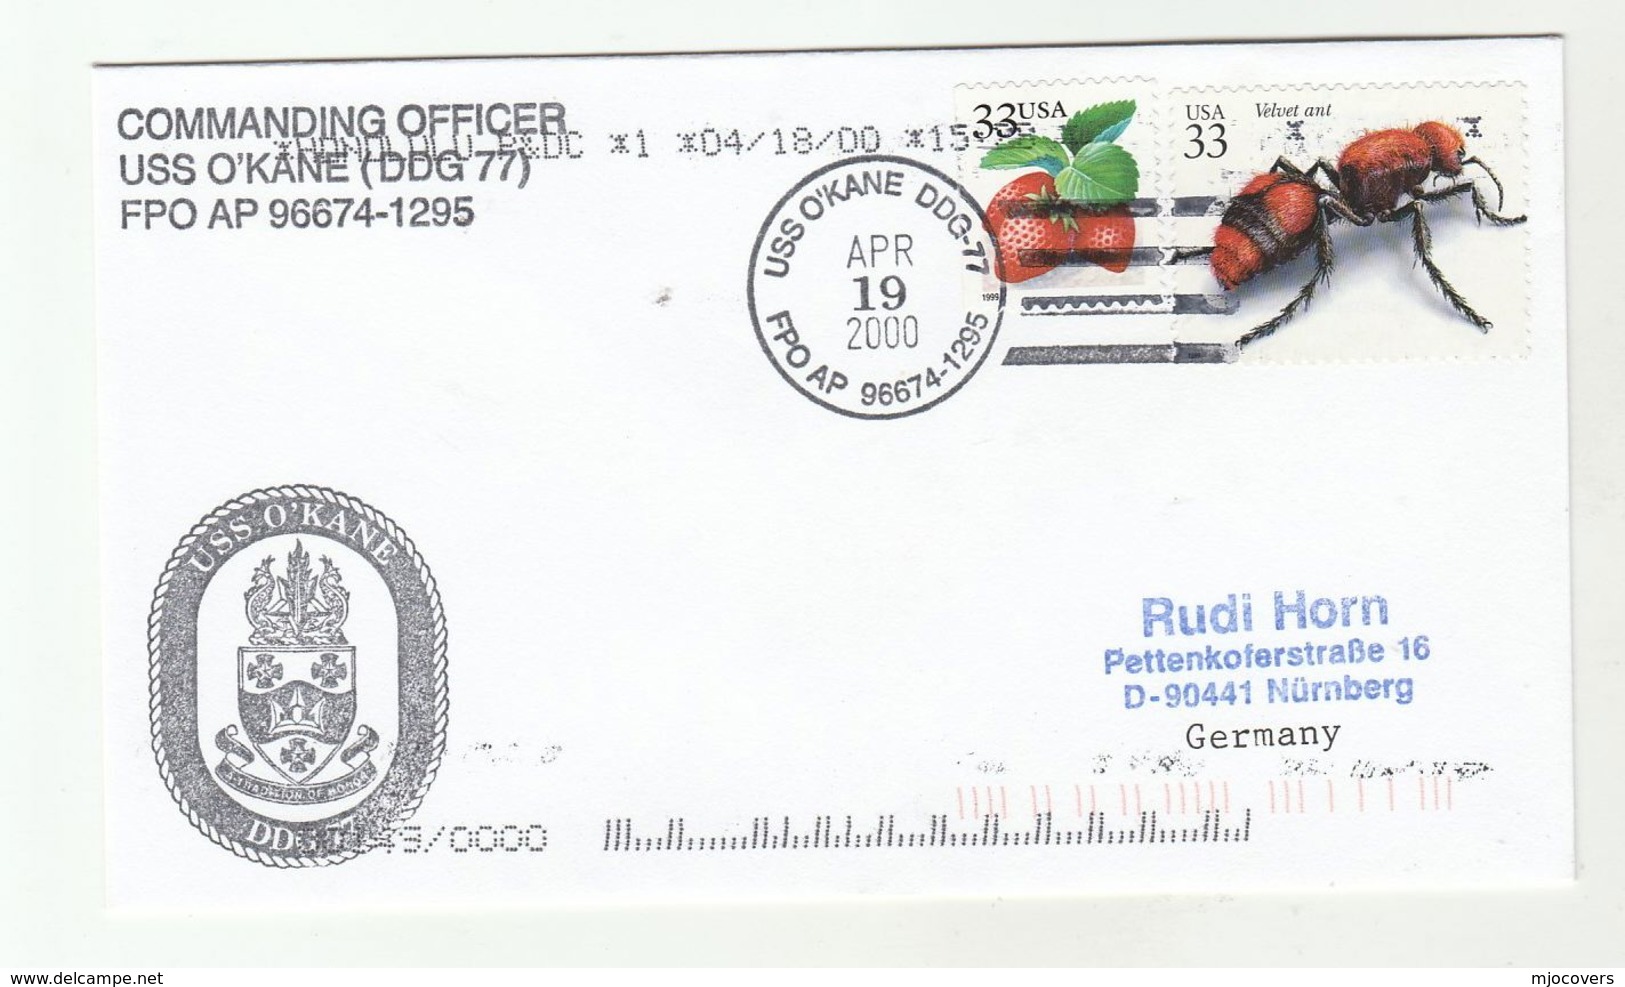 2000 USS O'KANE DDG-77 Cover FPO AE 96674-1295 Honolulu USA Navy Ship Ant Insect Strawberry Fruit Stamps - Ships